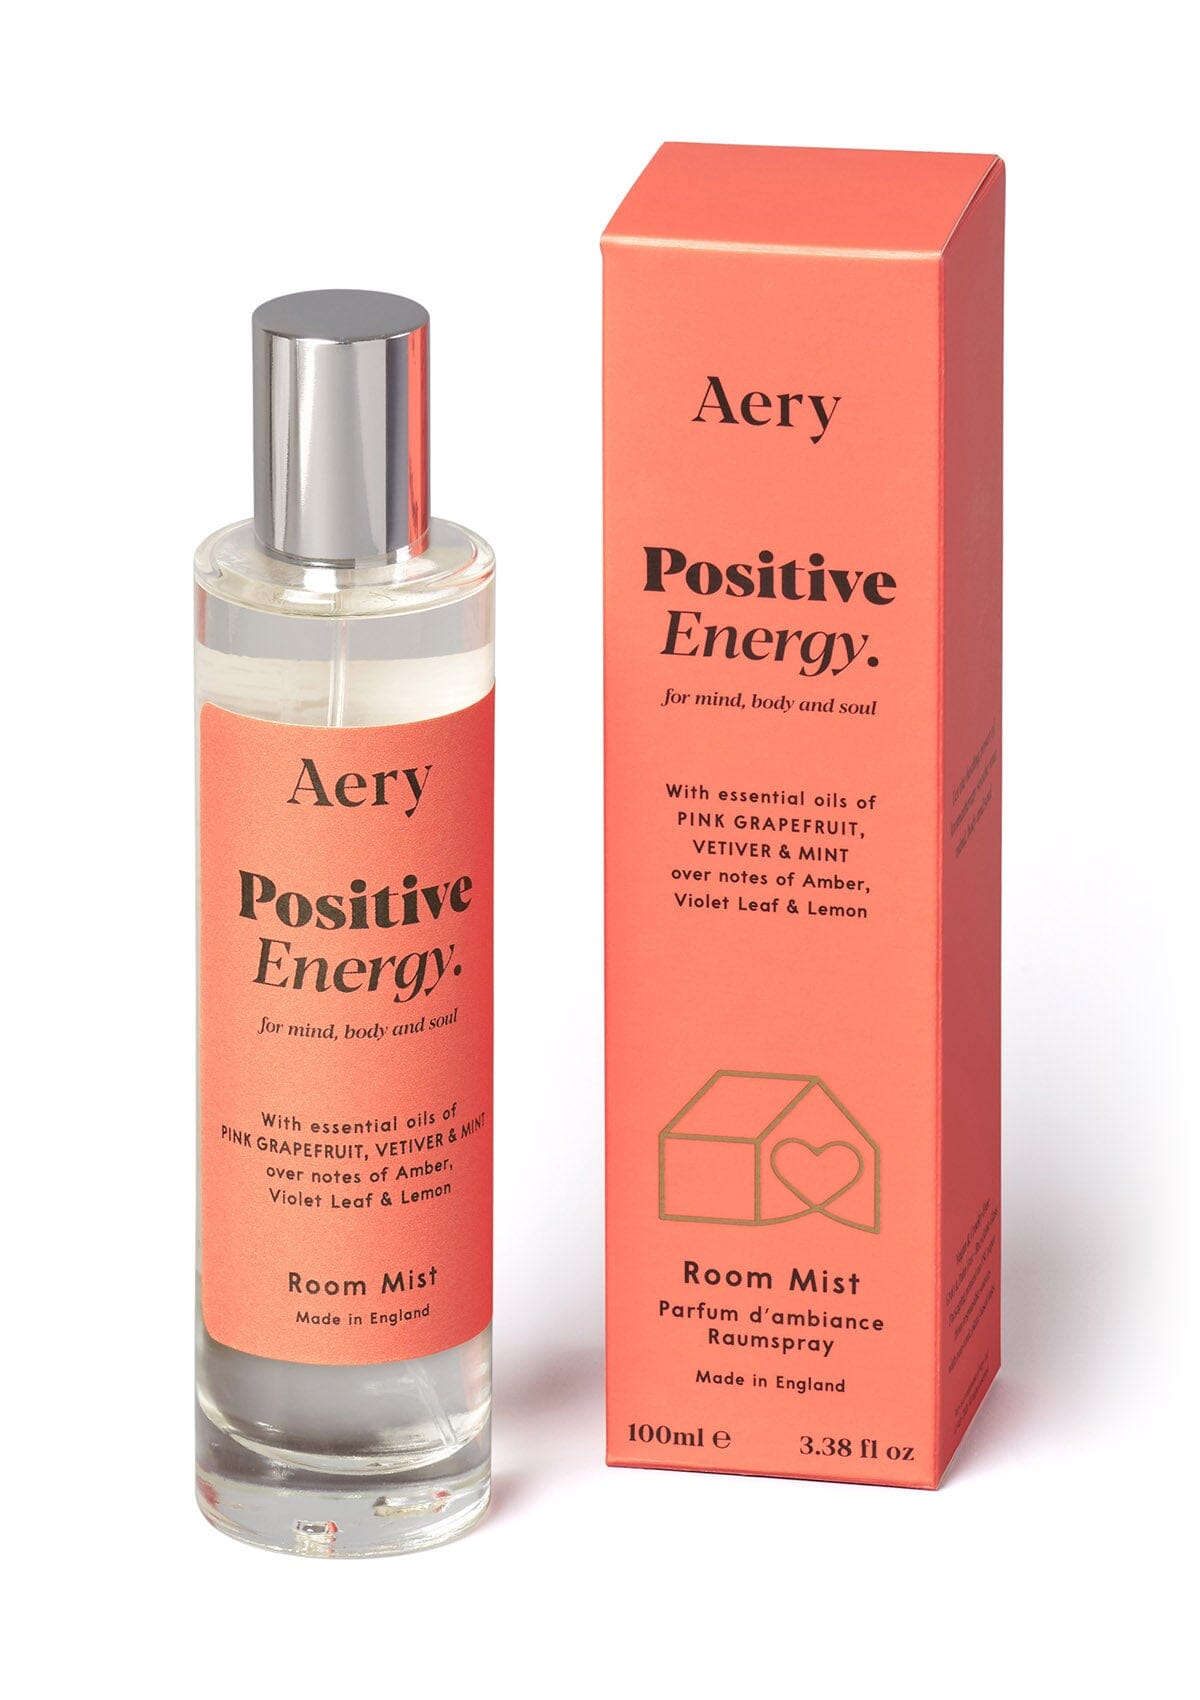 Orange Positive Energy room mist displayed next to product packaging on white background 